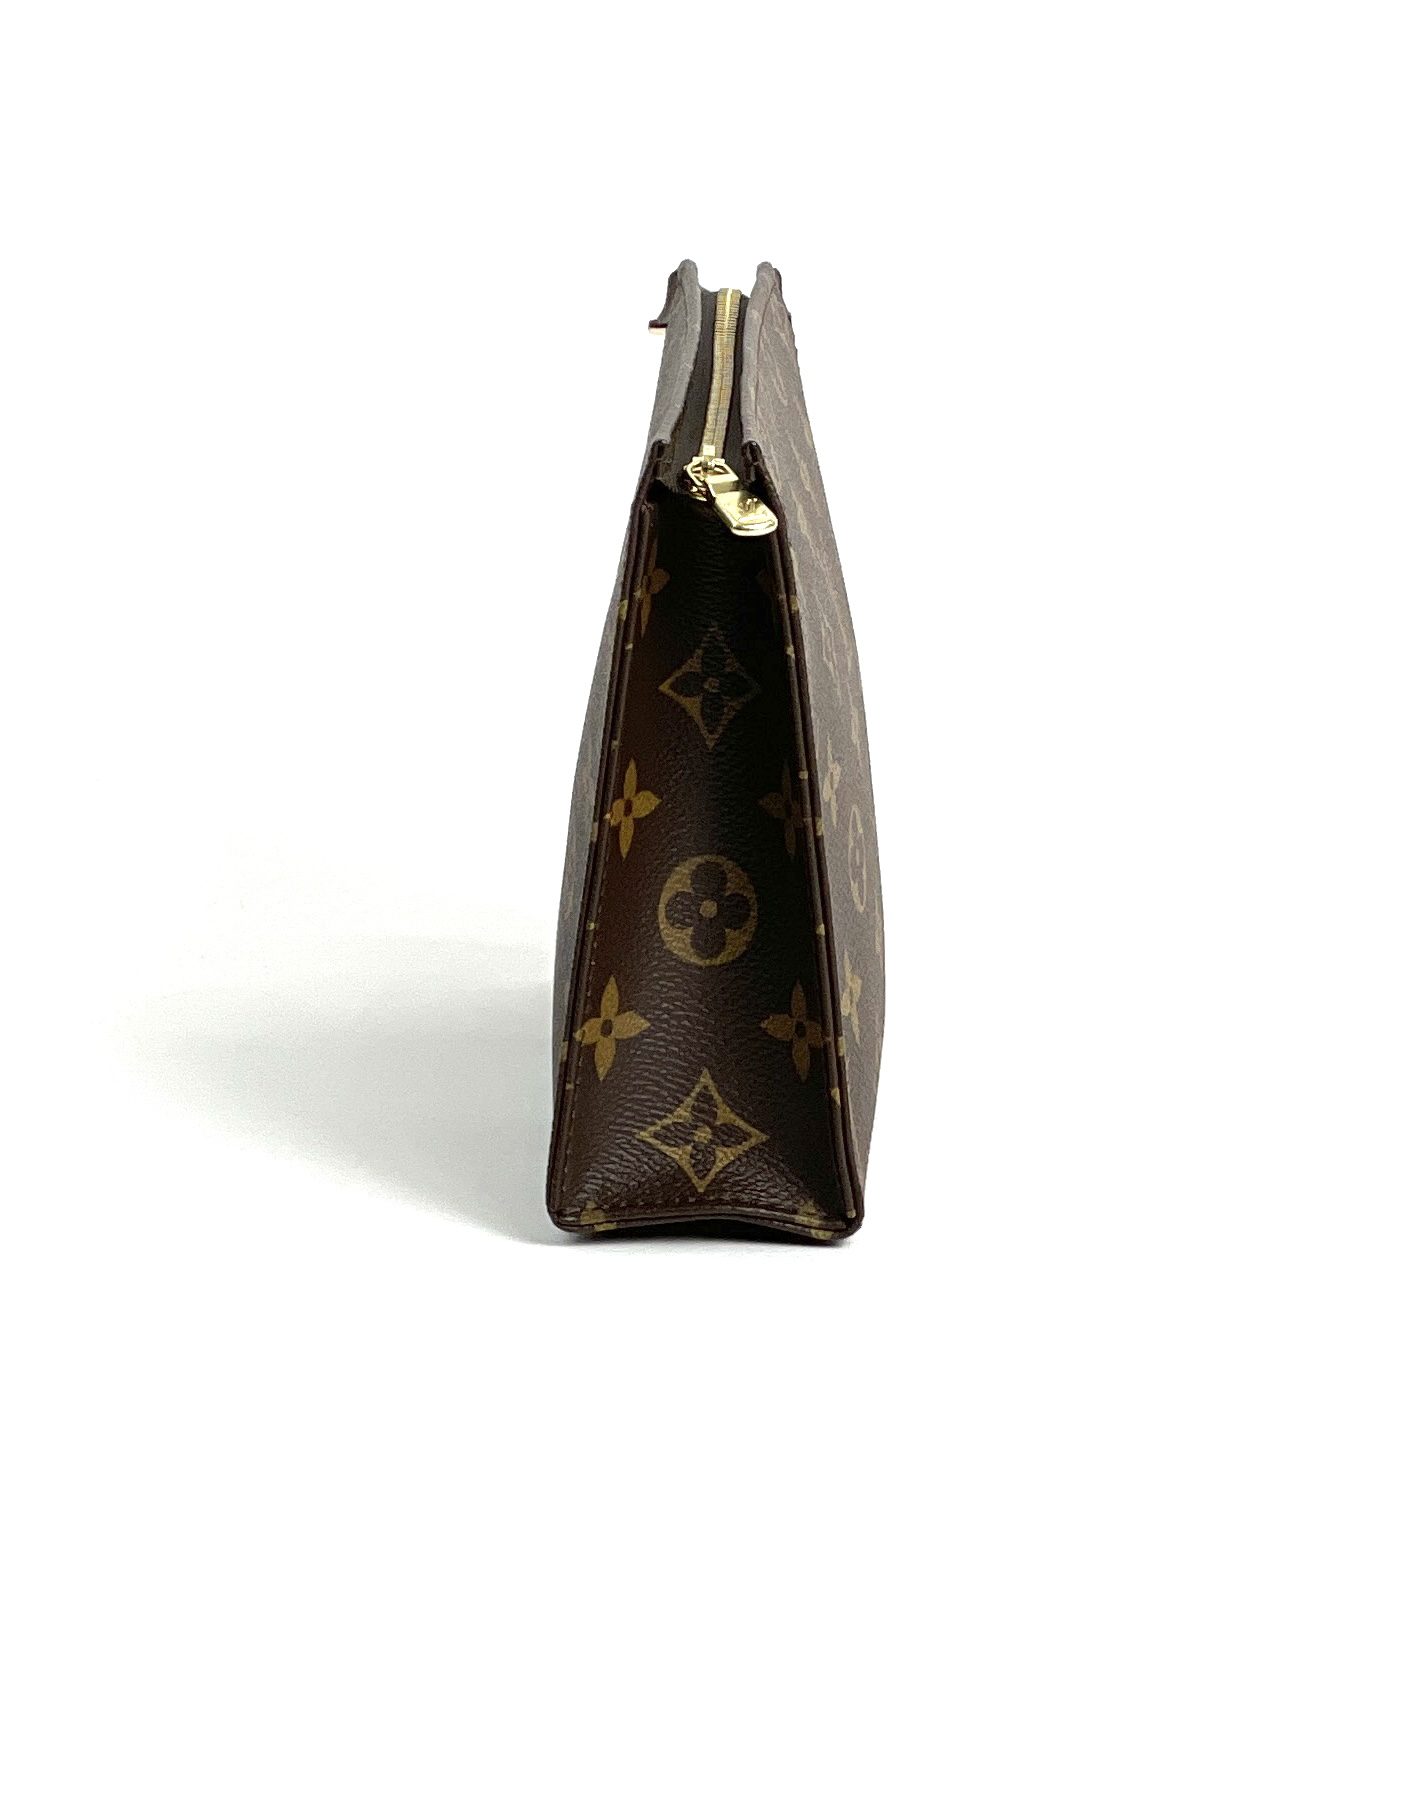 Lv Genuine Leather Toiletry Bag  Gold Chain Lv Toiletry Pouch 26 -  Crossbody 26 Bag - Aliexpress